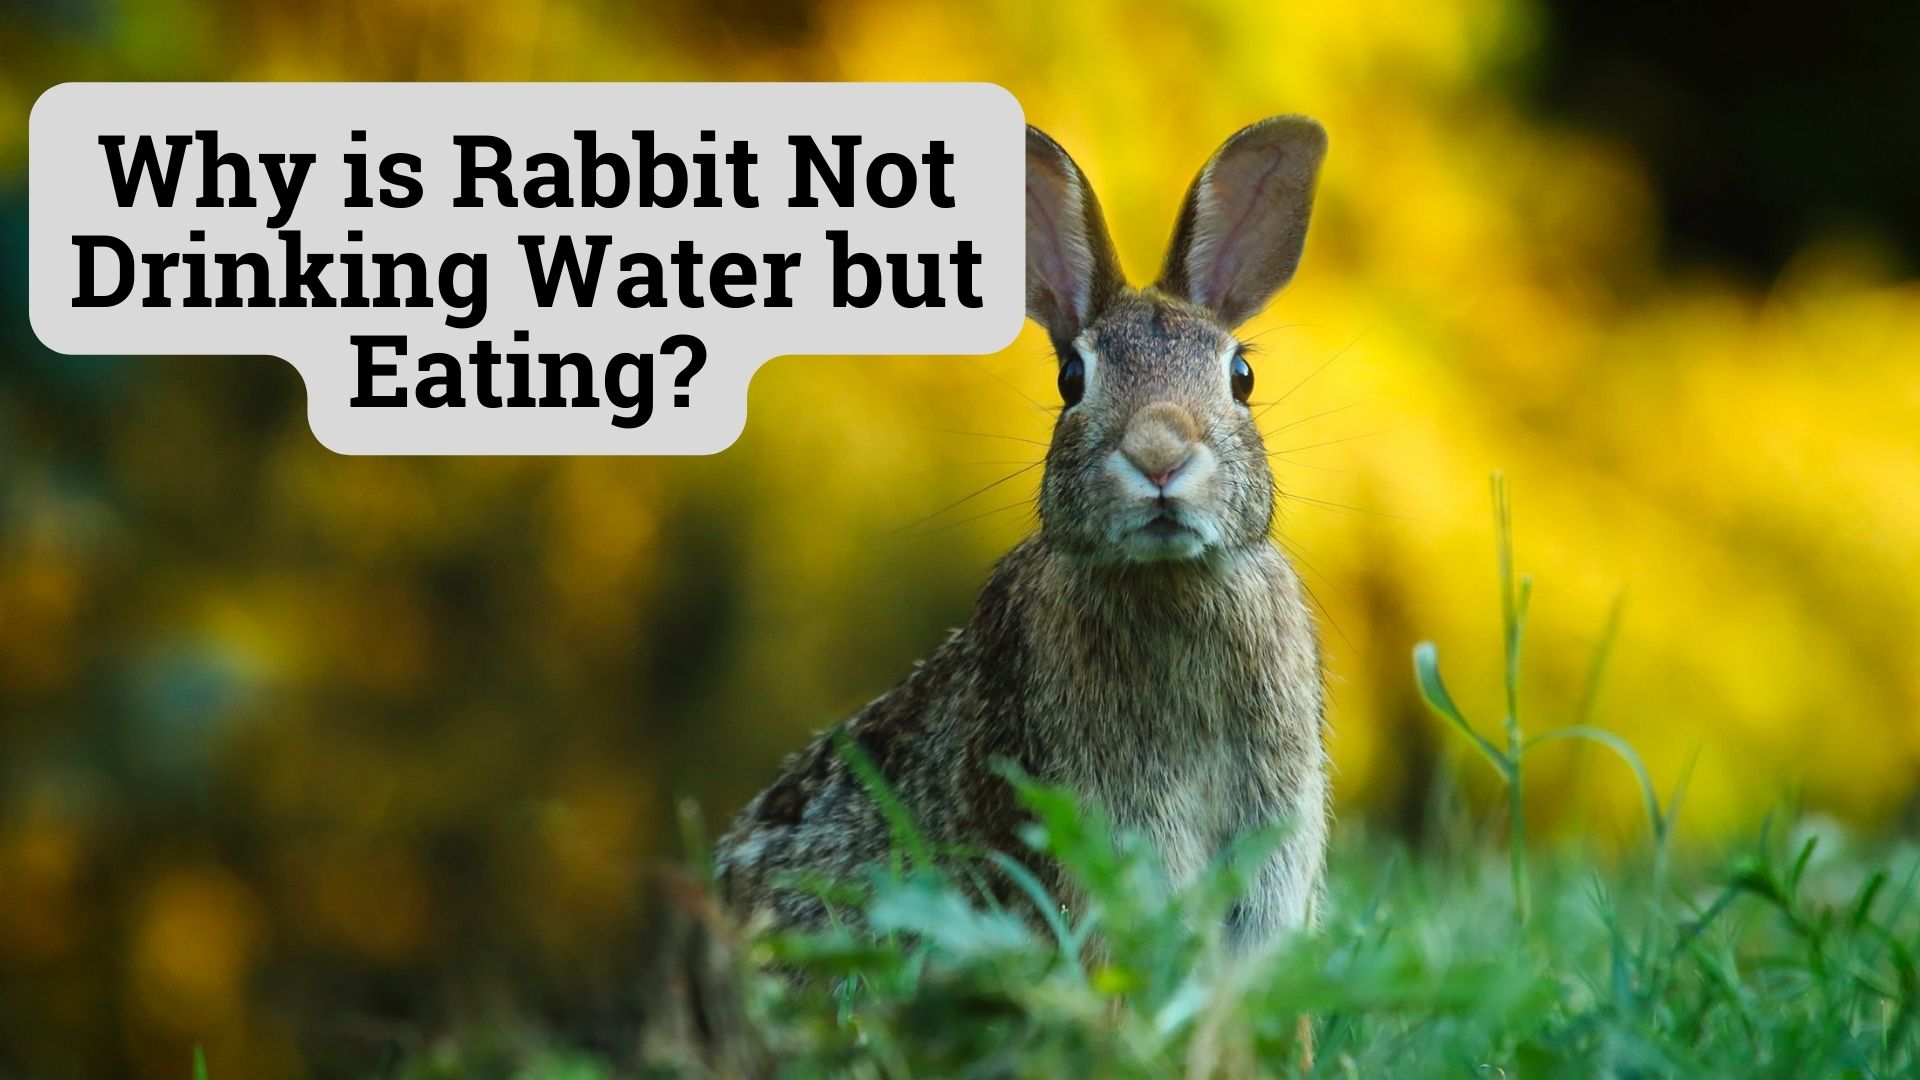 Why is Rabbit Not Drinking Water but Eating